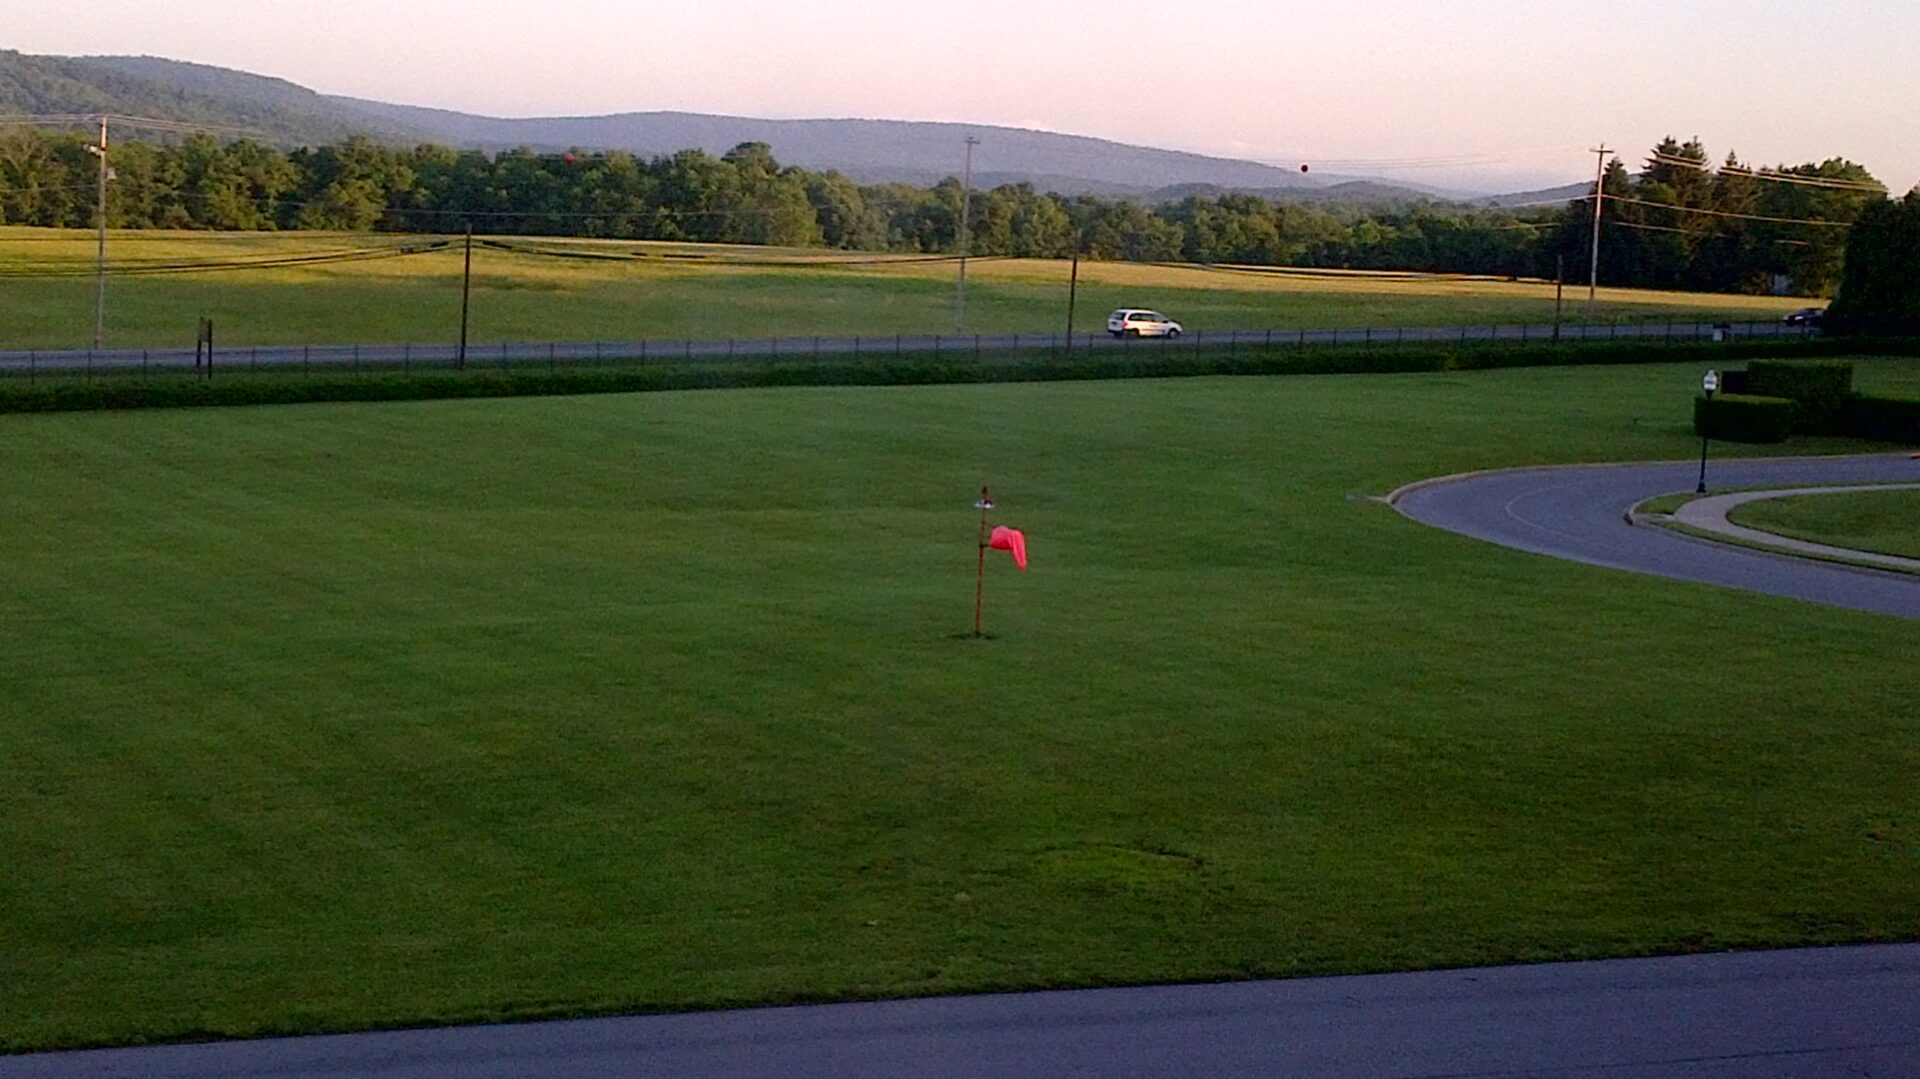 A red flag is in the middle of a field.